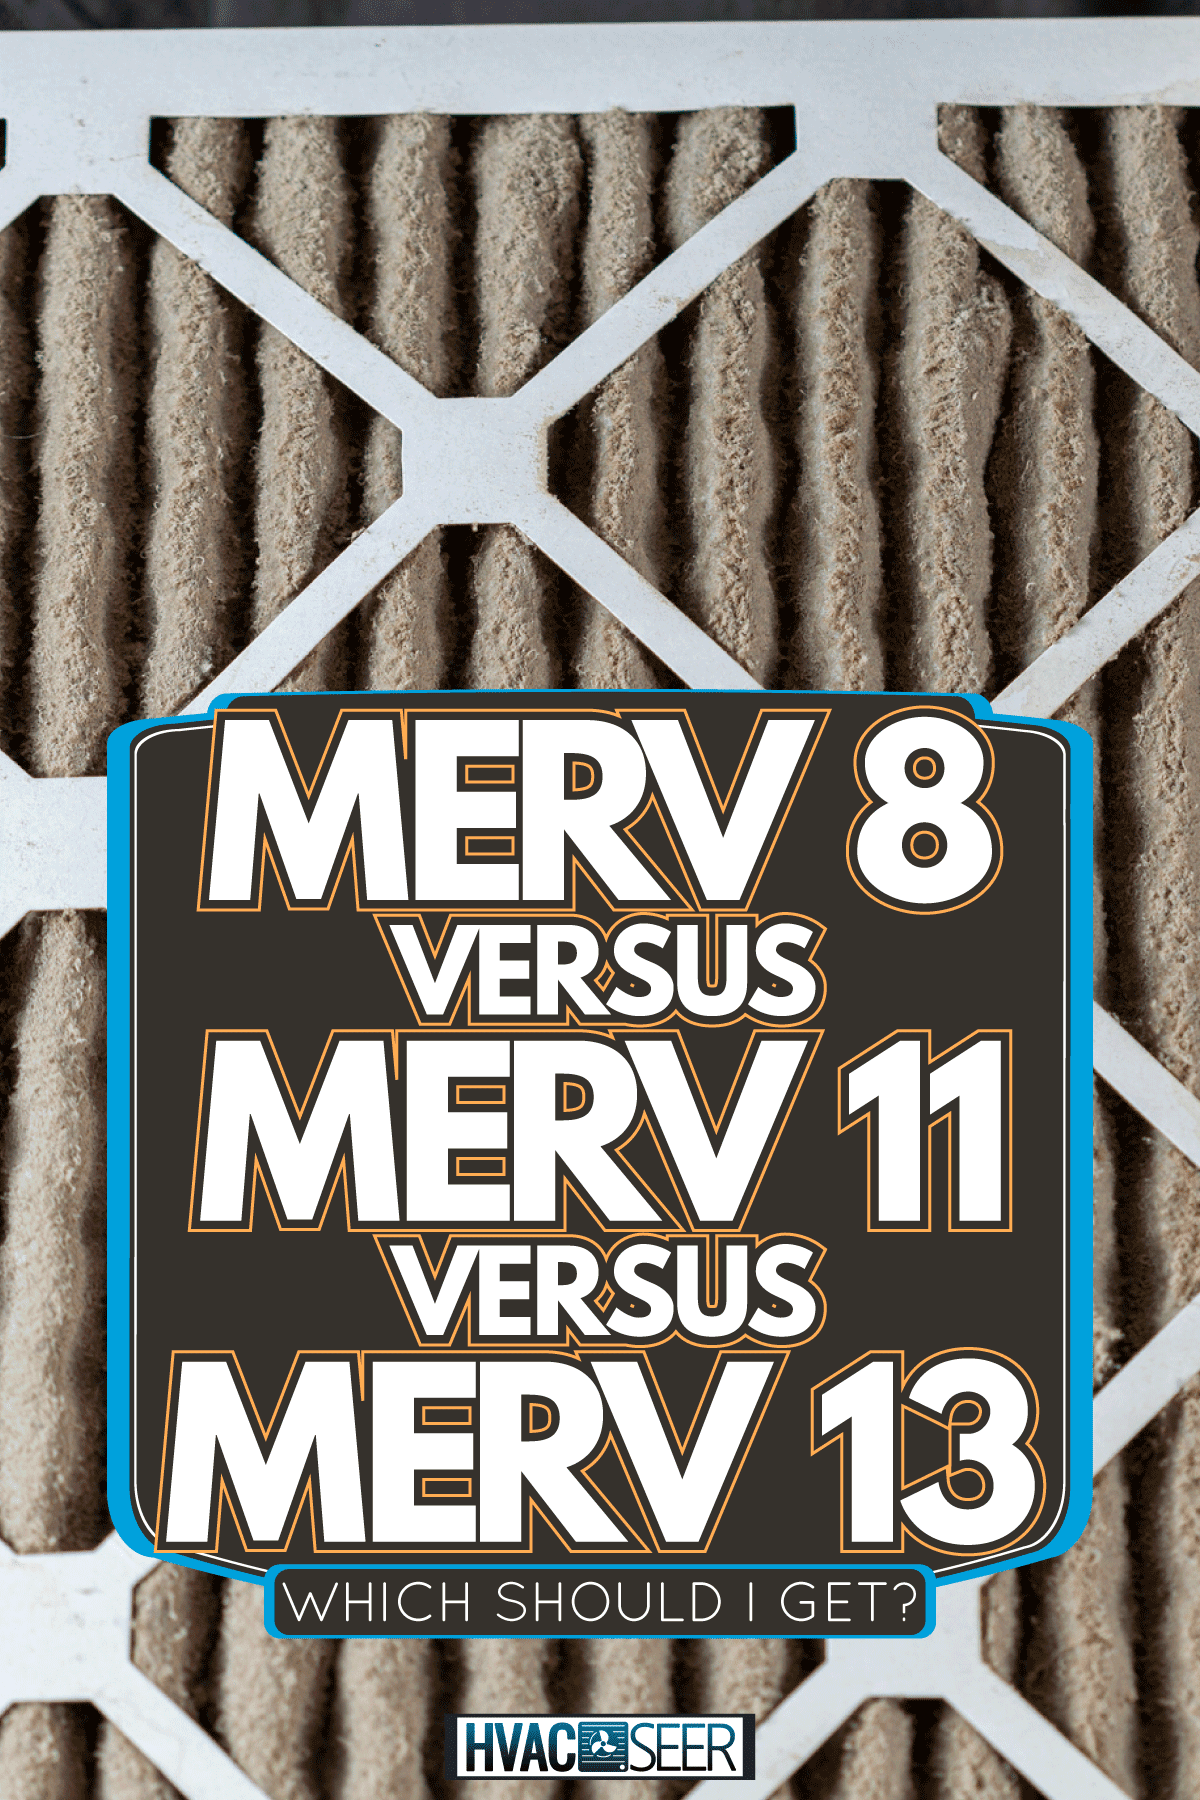 A person wearing blue gloves is holding a heavily clogged dirty air filter in hands before replacing it with the new one., MERV 8 Vs. MERV 11 Vs. MERV 13: Which Should I Get?